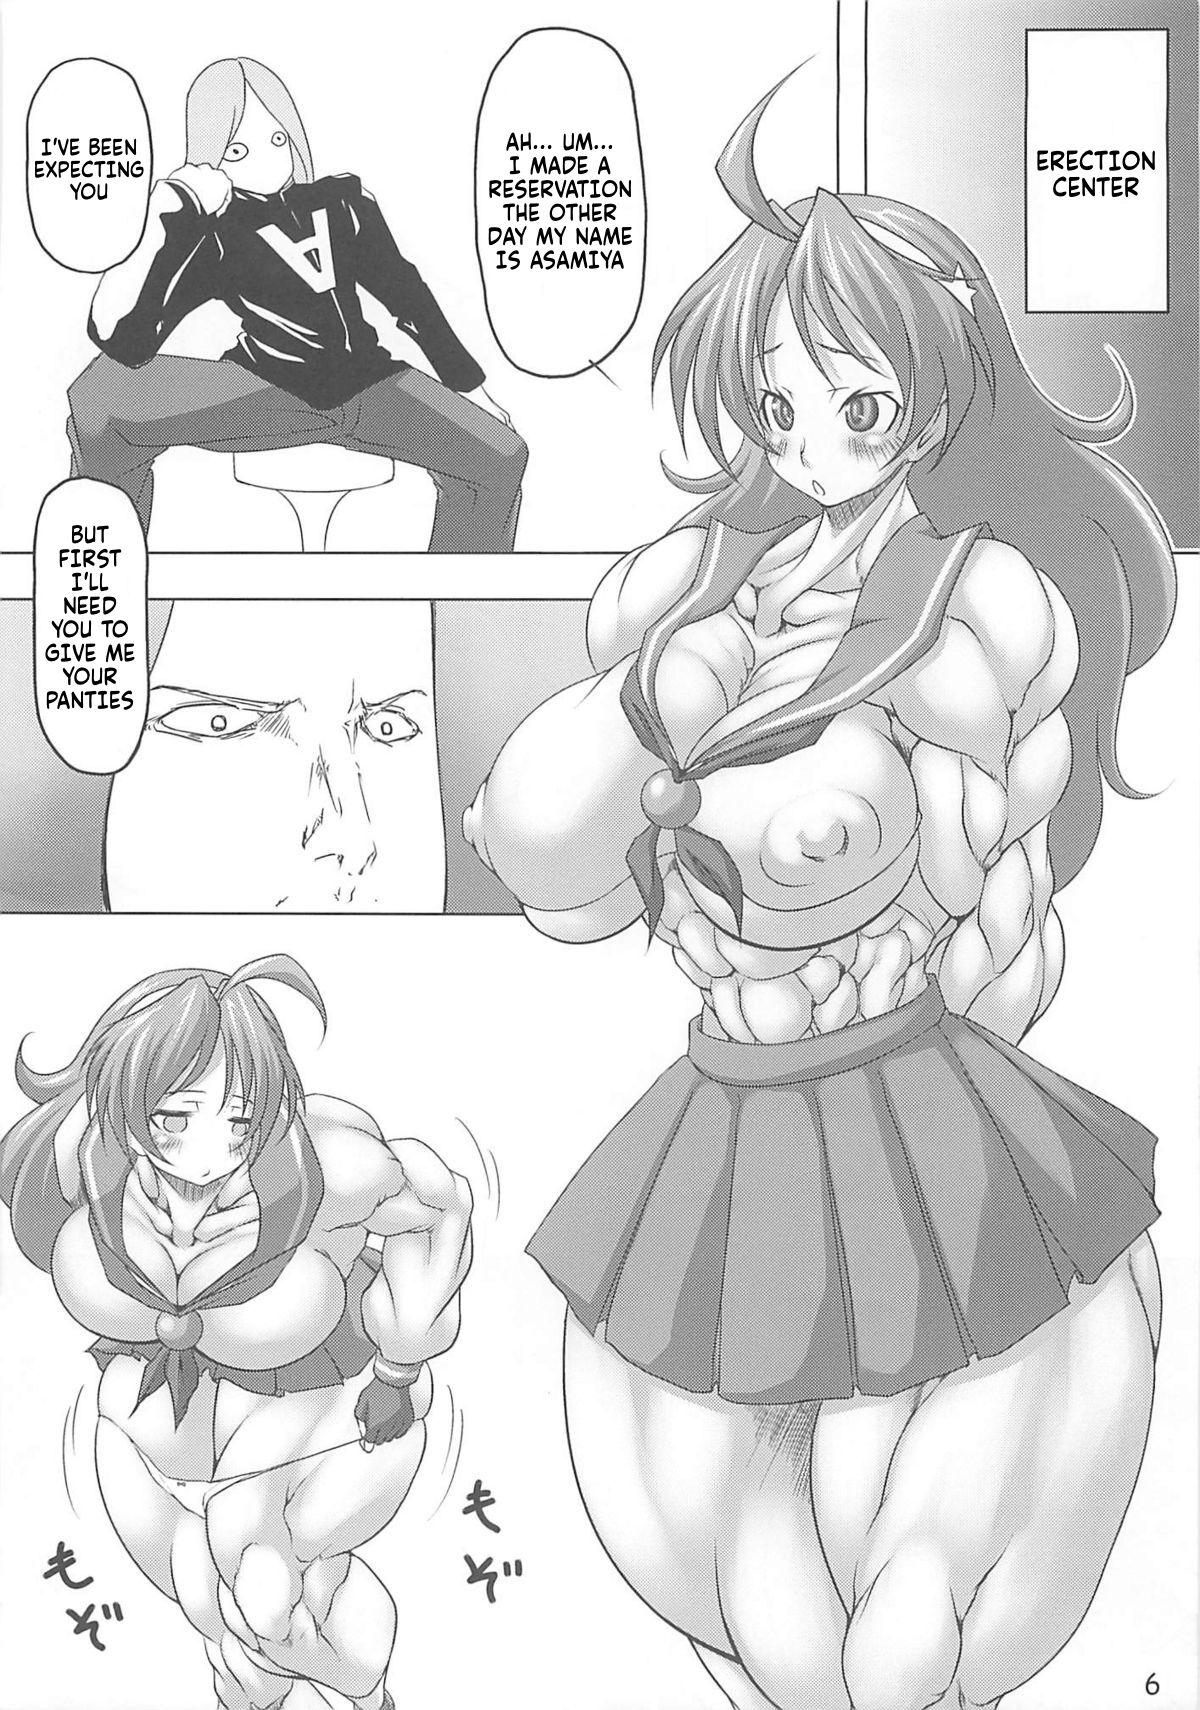 Mexicana GIGANTIC DIVA - King of fighters Sex Massage - Page 5